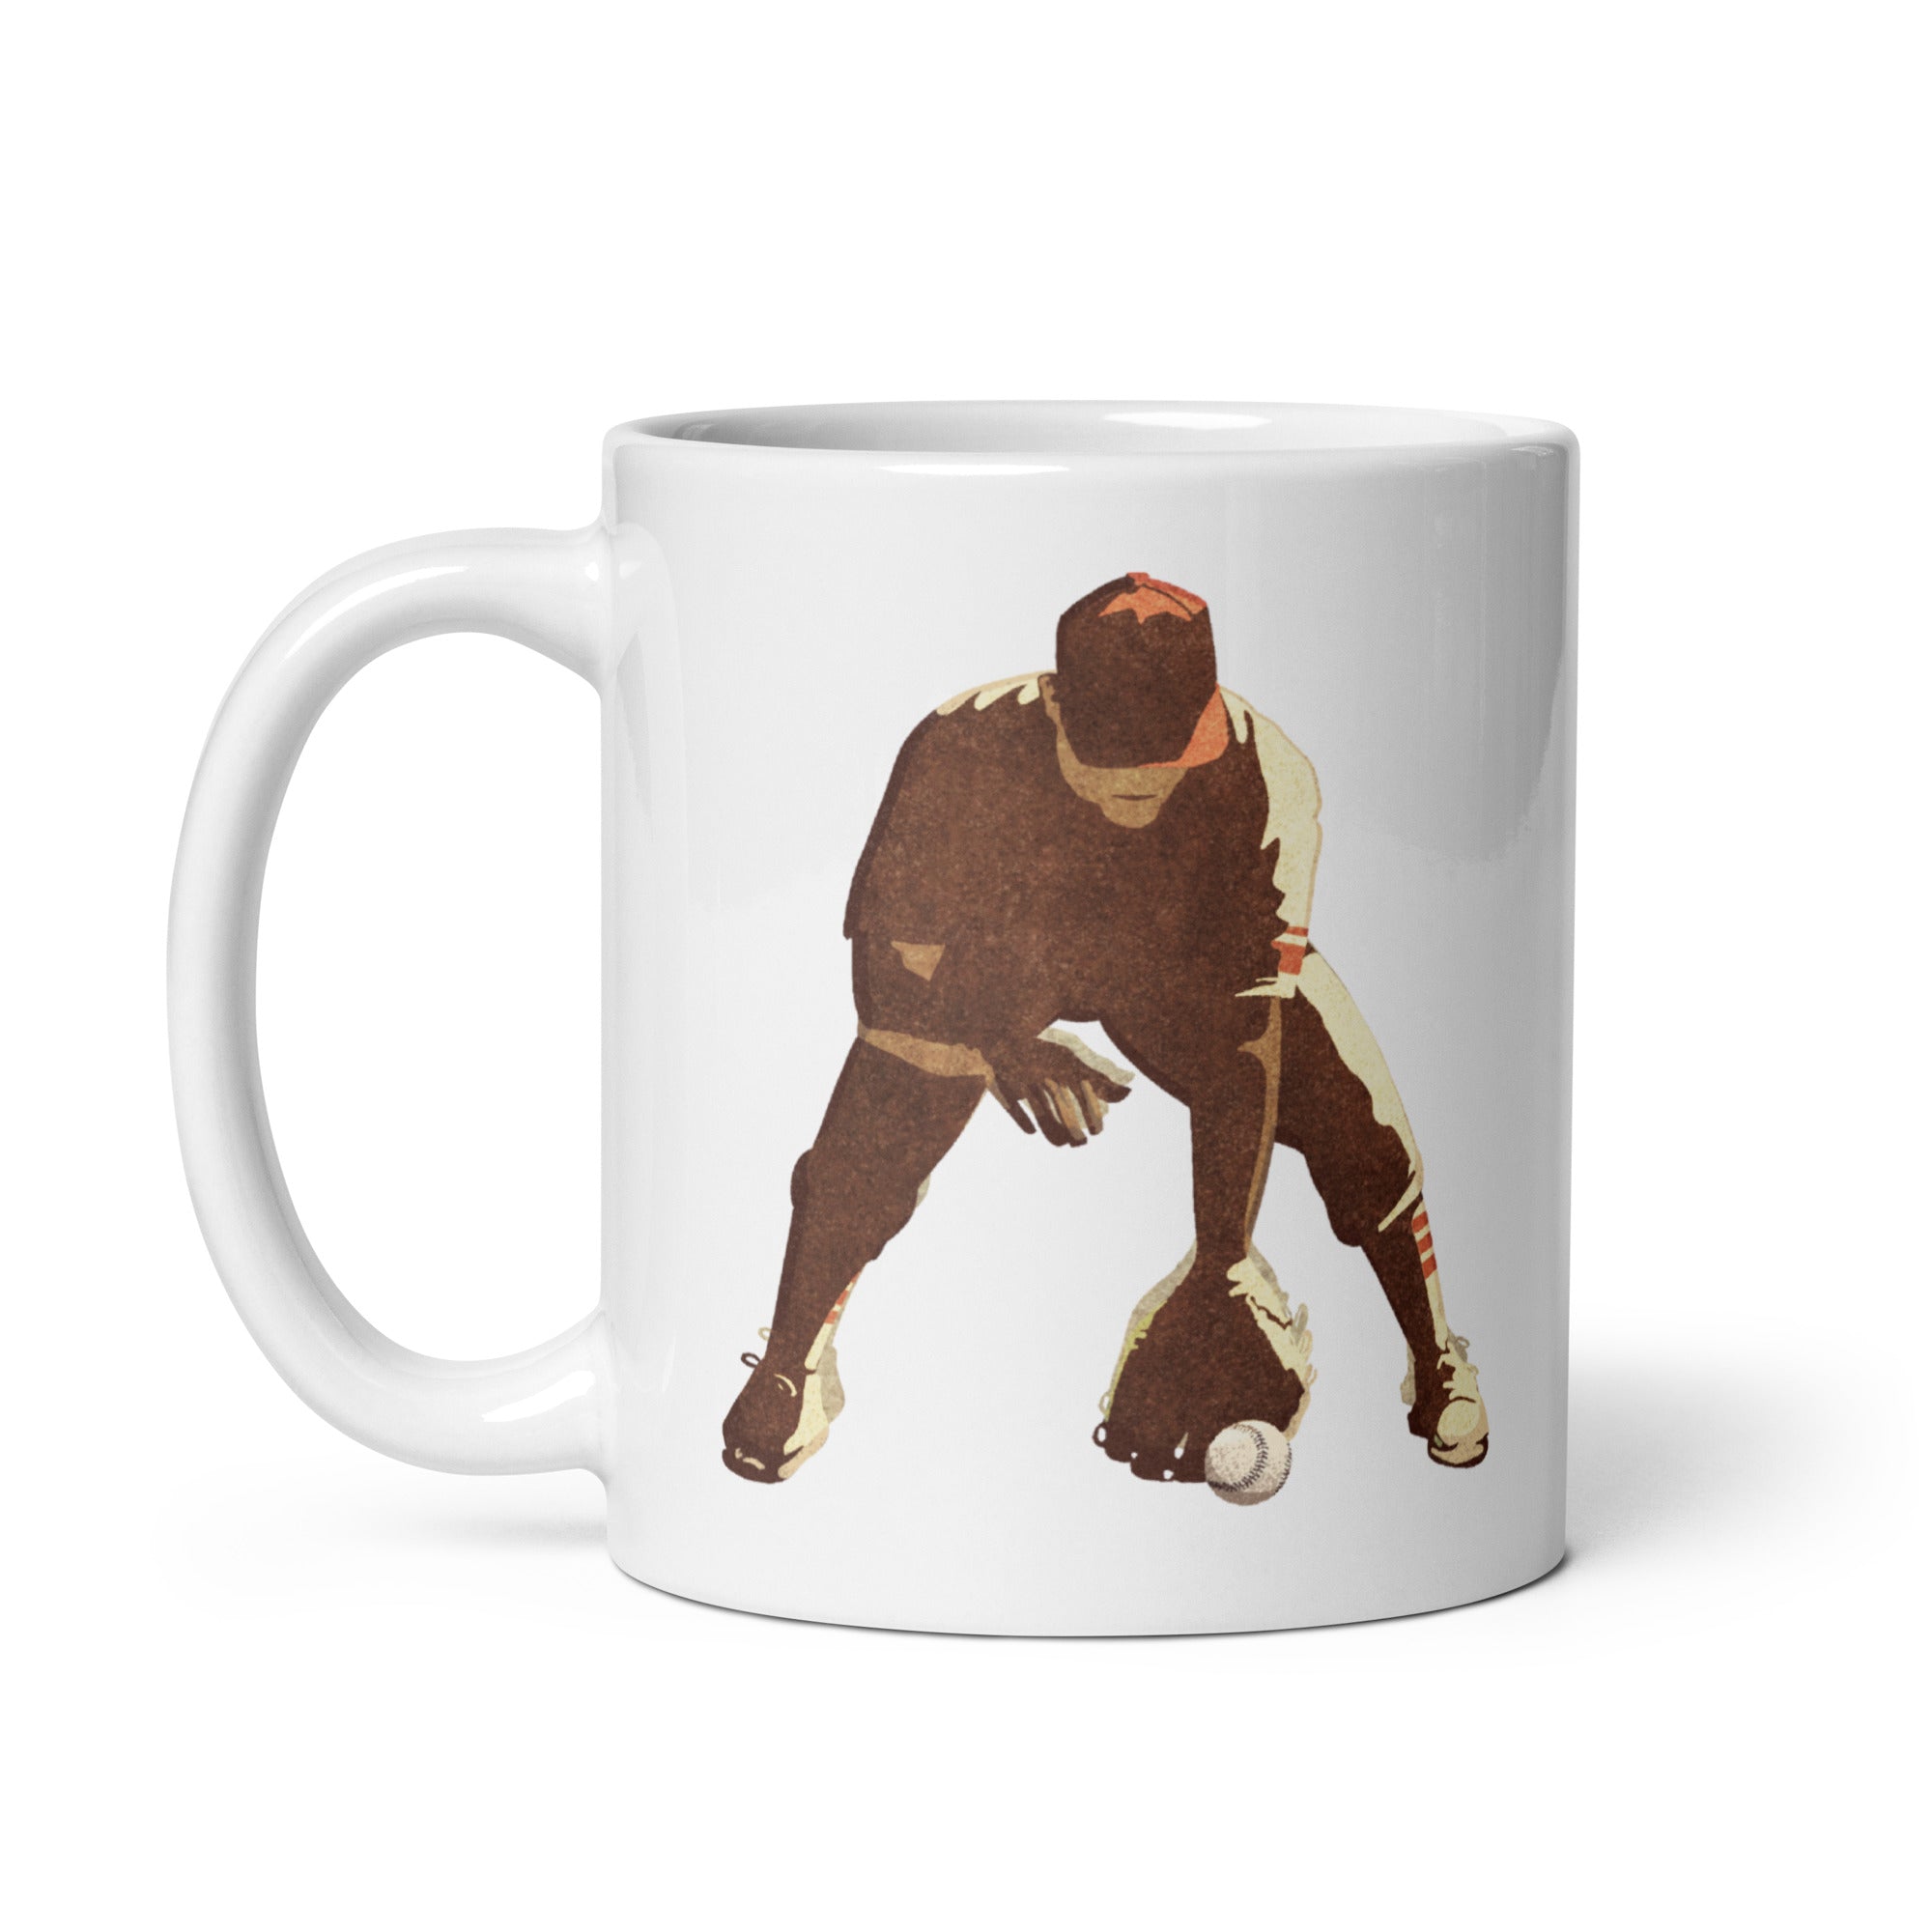 Retro styled ceramic mug with an American Baseball Player catching a ground ball and the words “Baseball. America’s Pastime” printed on one side. 